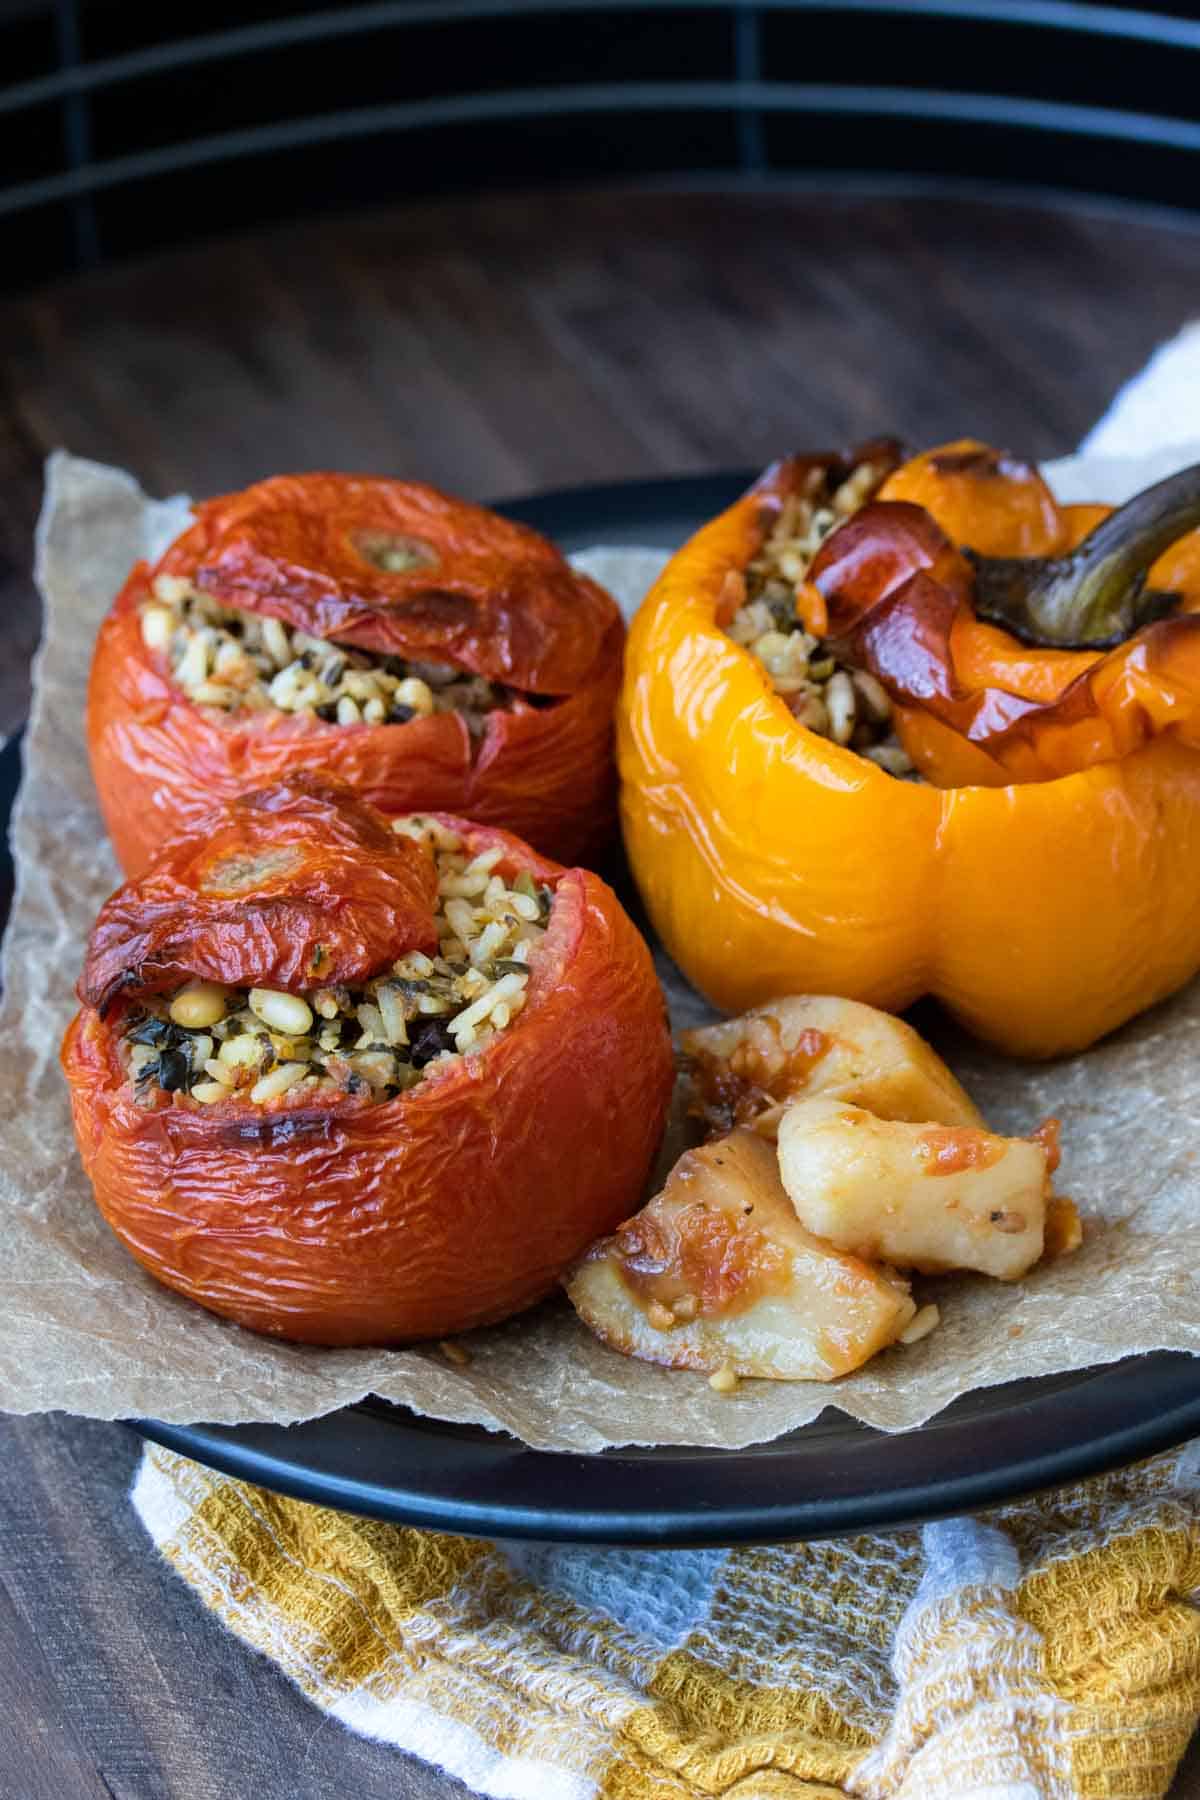 Rice stuffed tomatoes and pepper with potatoes on a parchment lined plate